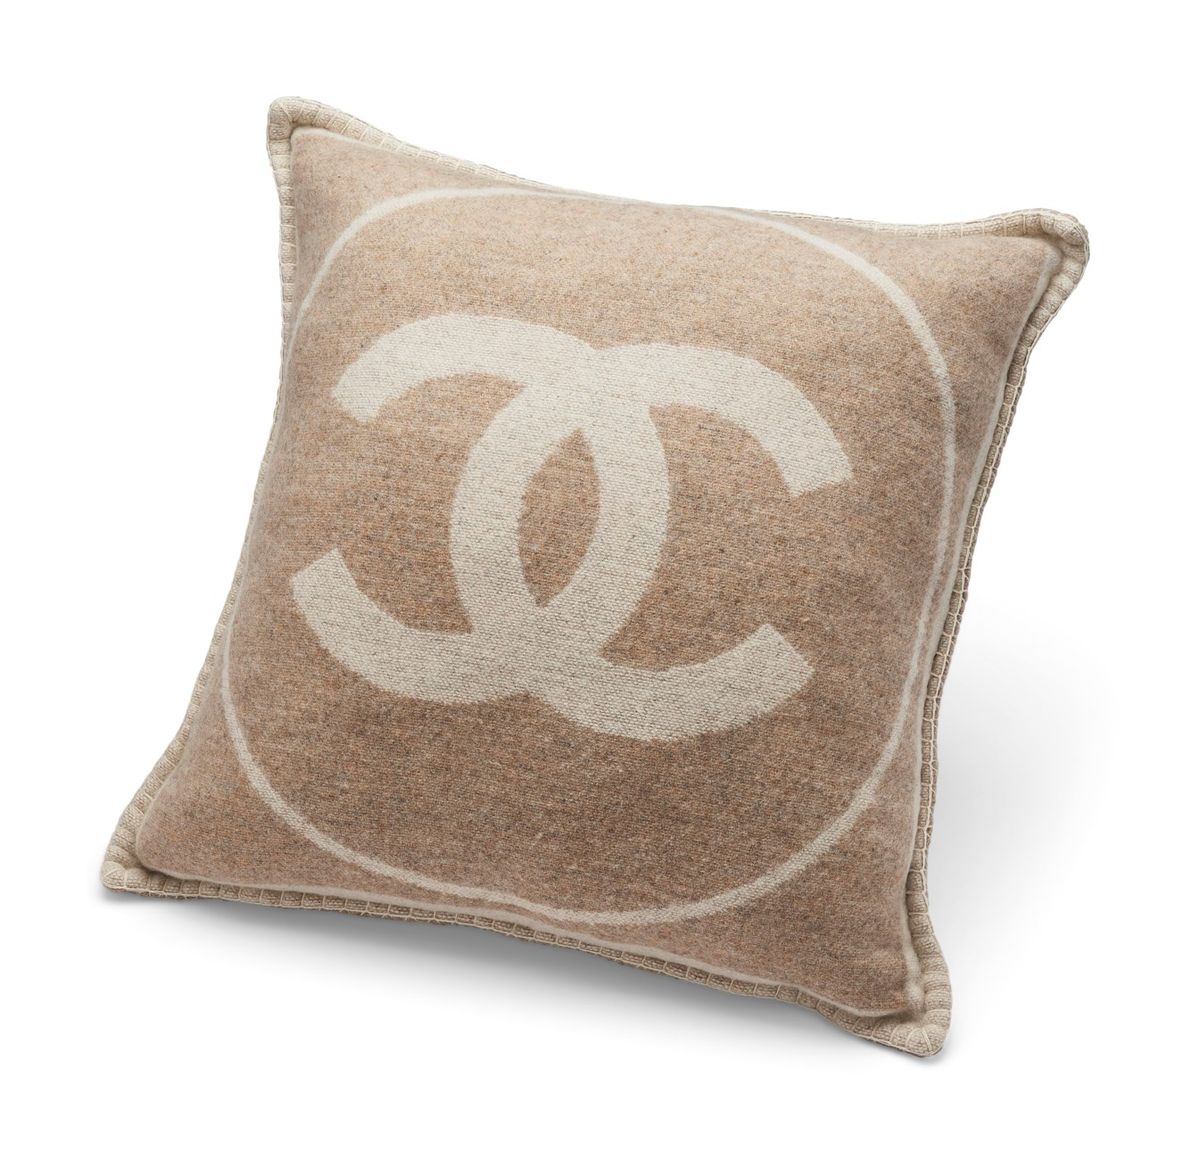 Chanel Throw Pillow at Sotheby's Auction